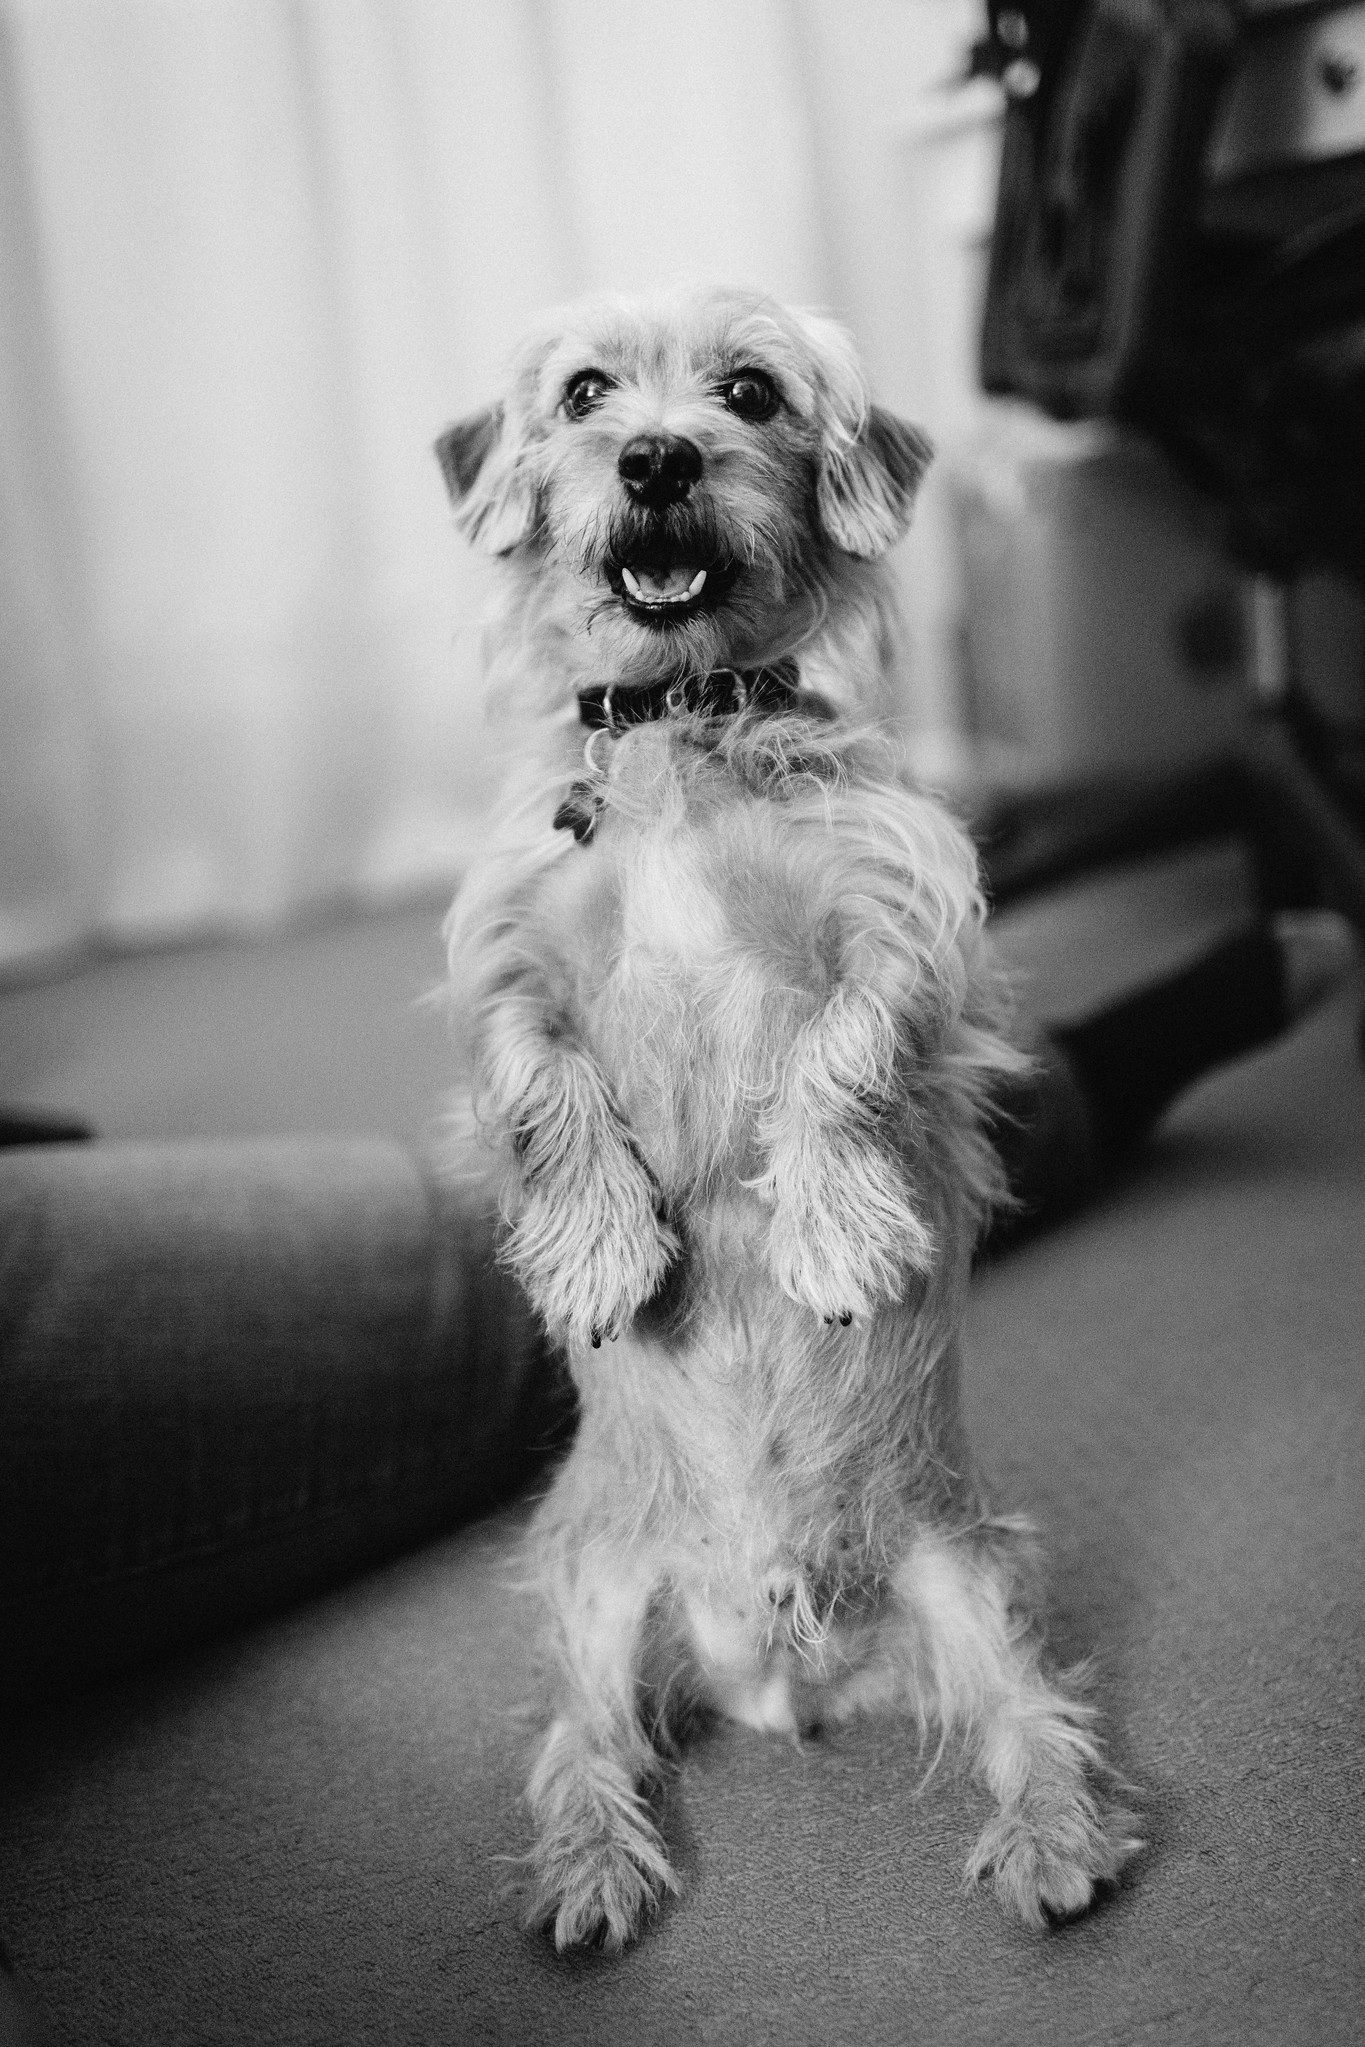 Beanie sitting up on his hind legs, smiling.